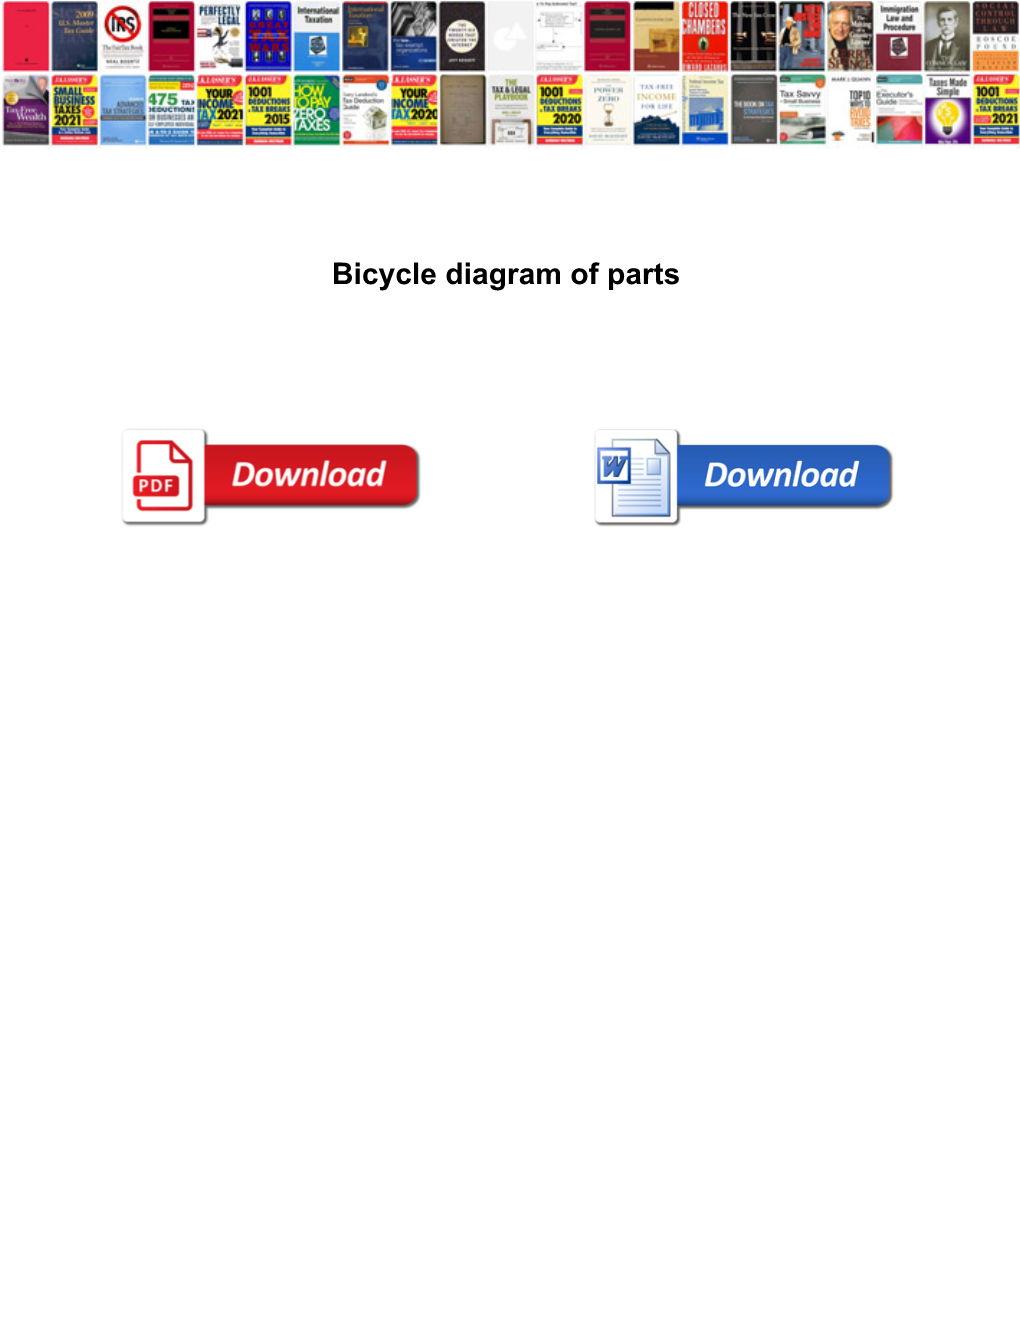 Bicycle Diagram of Parts for Other Cycling Related Terms Besides Parts See Glossary of Cycling